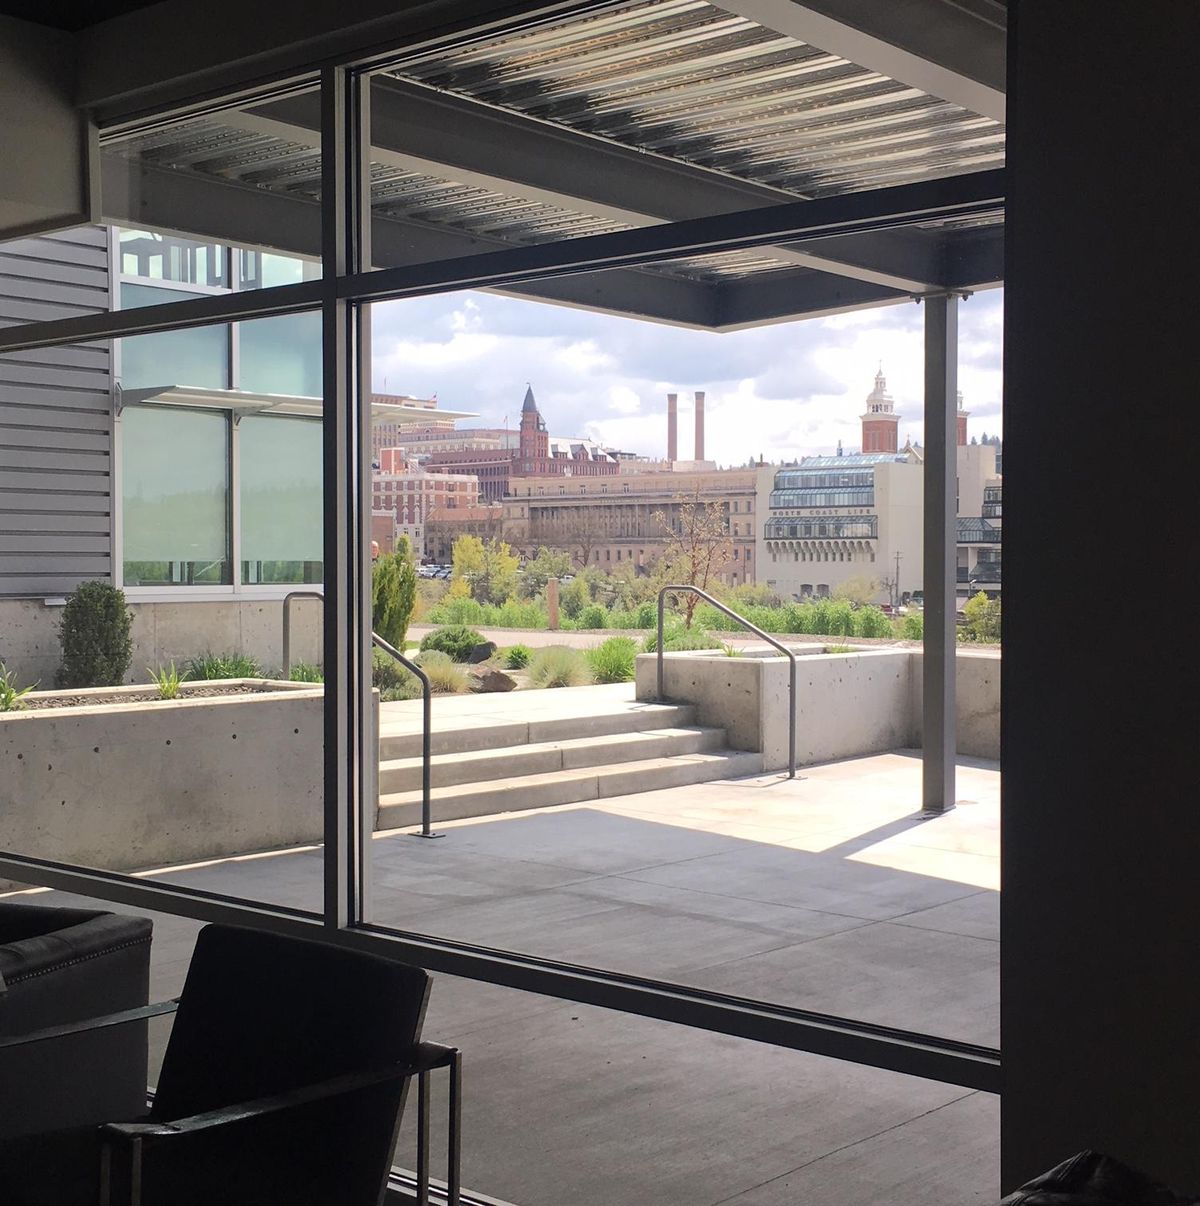 The view from the newly opened downstairs lounge at Umi Kitchen and Sushi Bar features sweeping views of the downtown Spokane skyline. (Adriana Janovich / The Spokesman-Review)